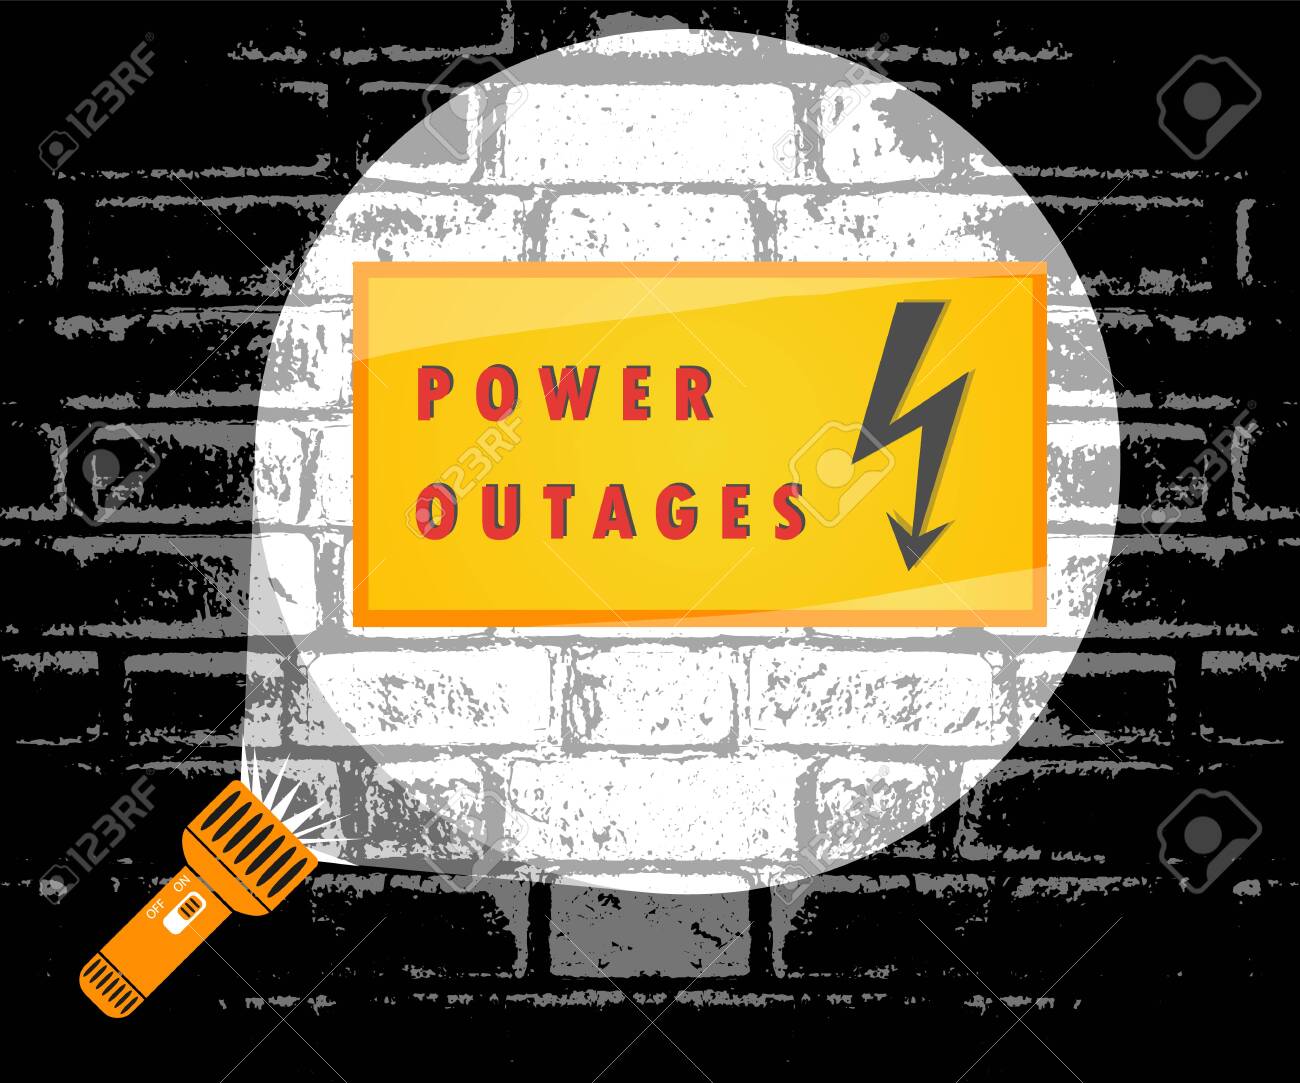 https://www.colonieems.org/wp-content/uploads/2020/10/127786250-power-outage-flashlight-beam-of-light-warning-sign-vector-illustration-poster-banner-1-1.jpg